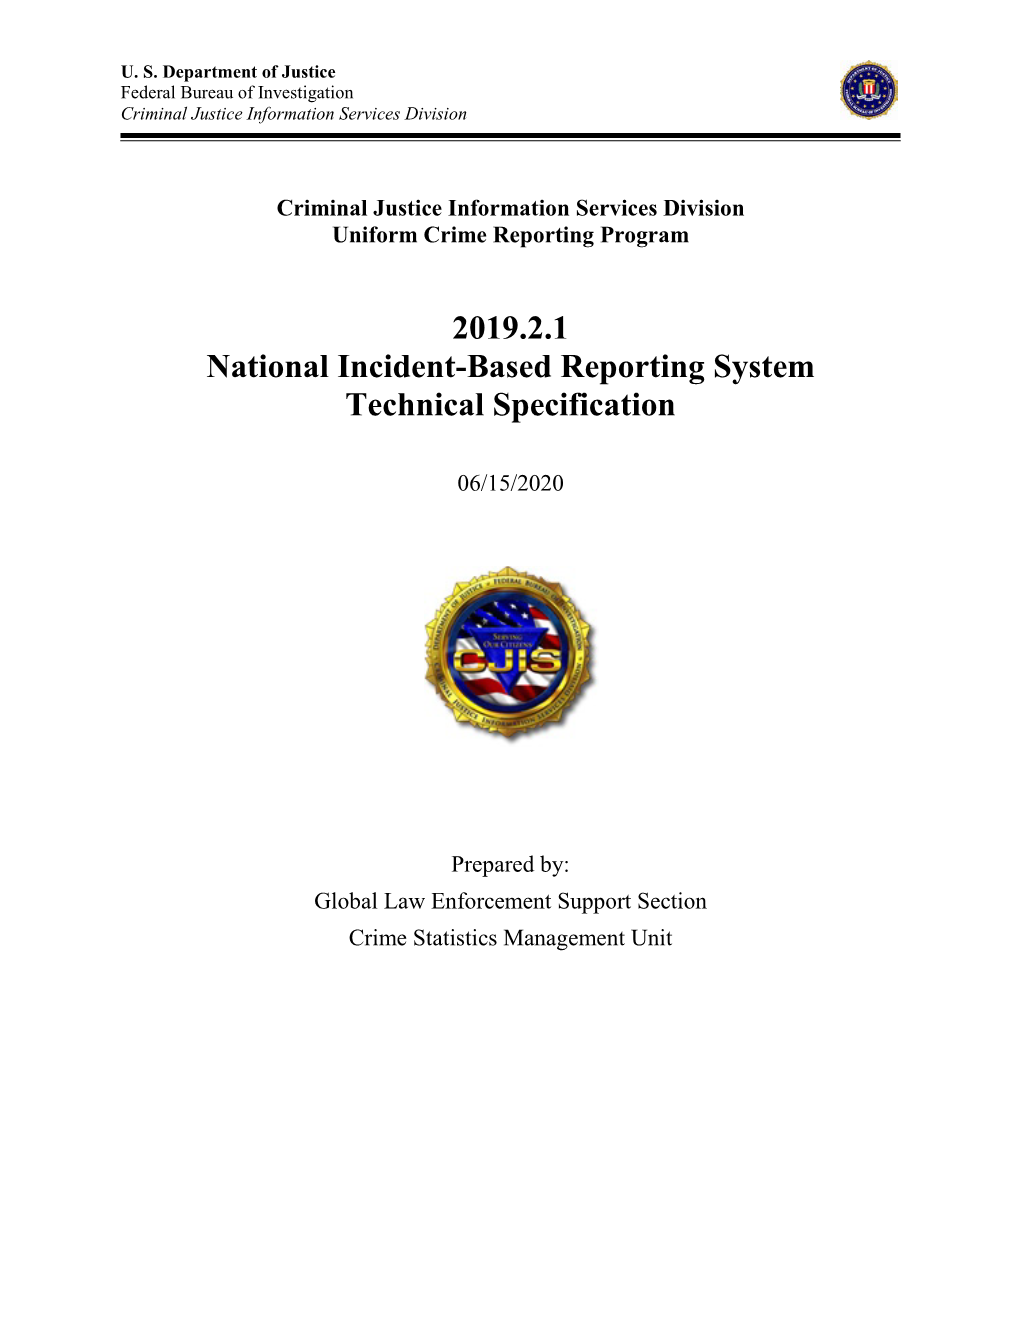 2019.2.1 National Incident-Based Reporting System Technical Specification